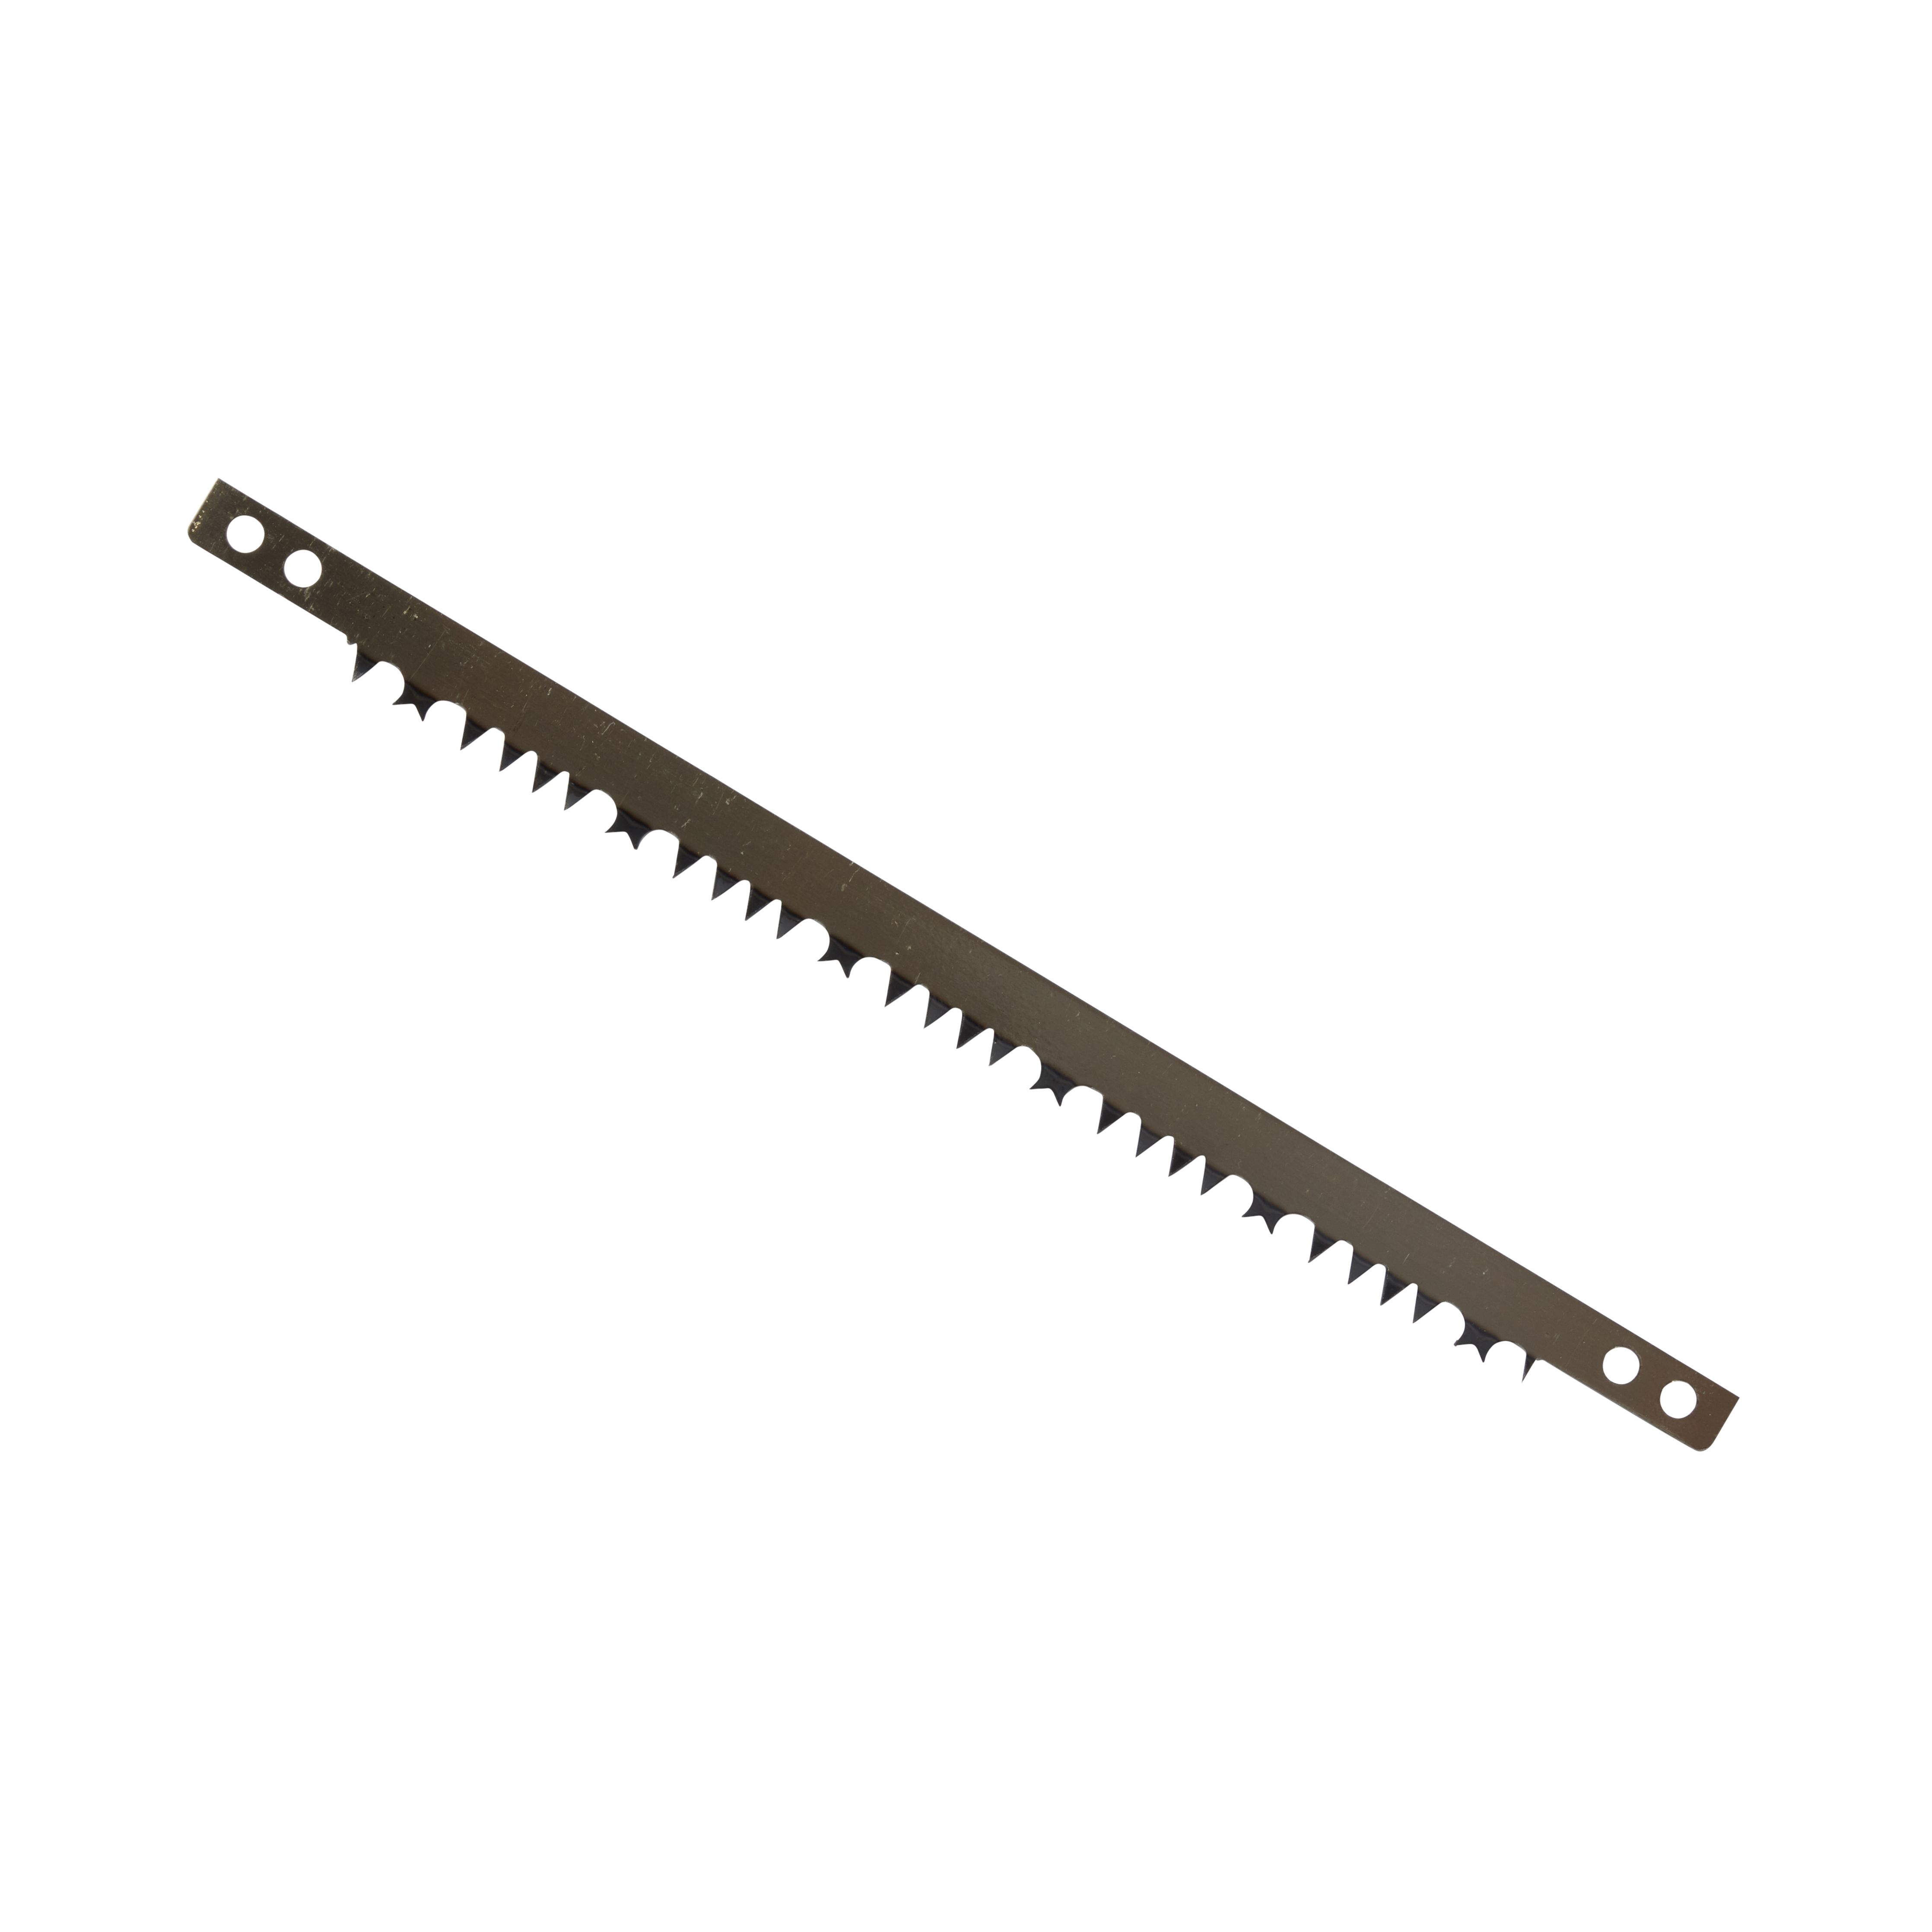 Carbon steel Green wood Bow saw blade 4 TPI (L)320mm